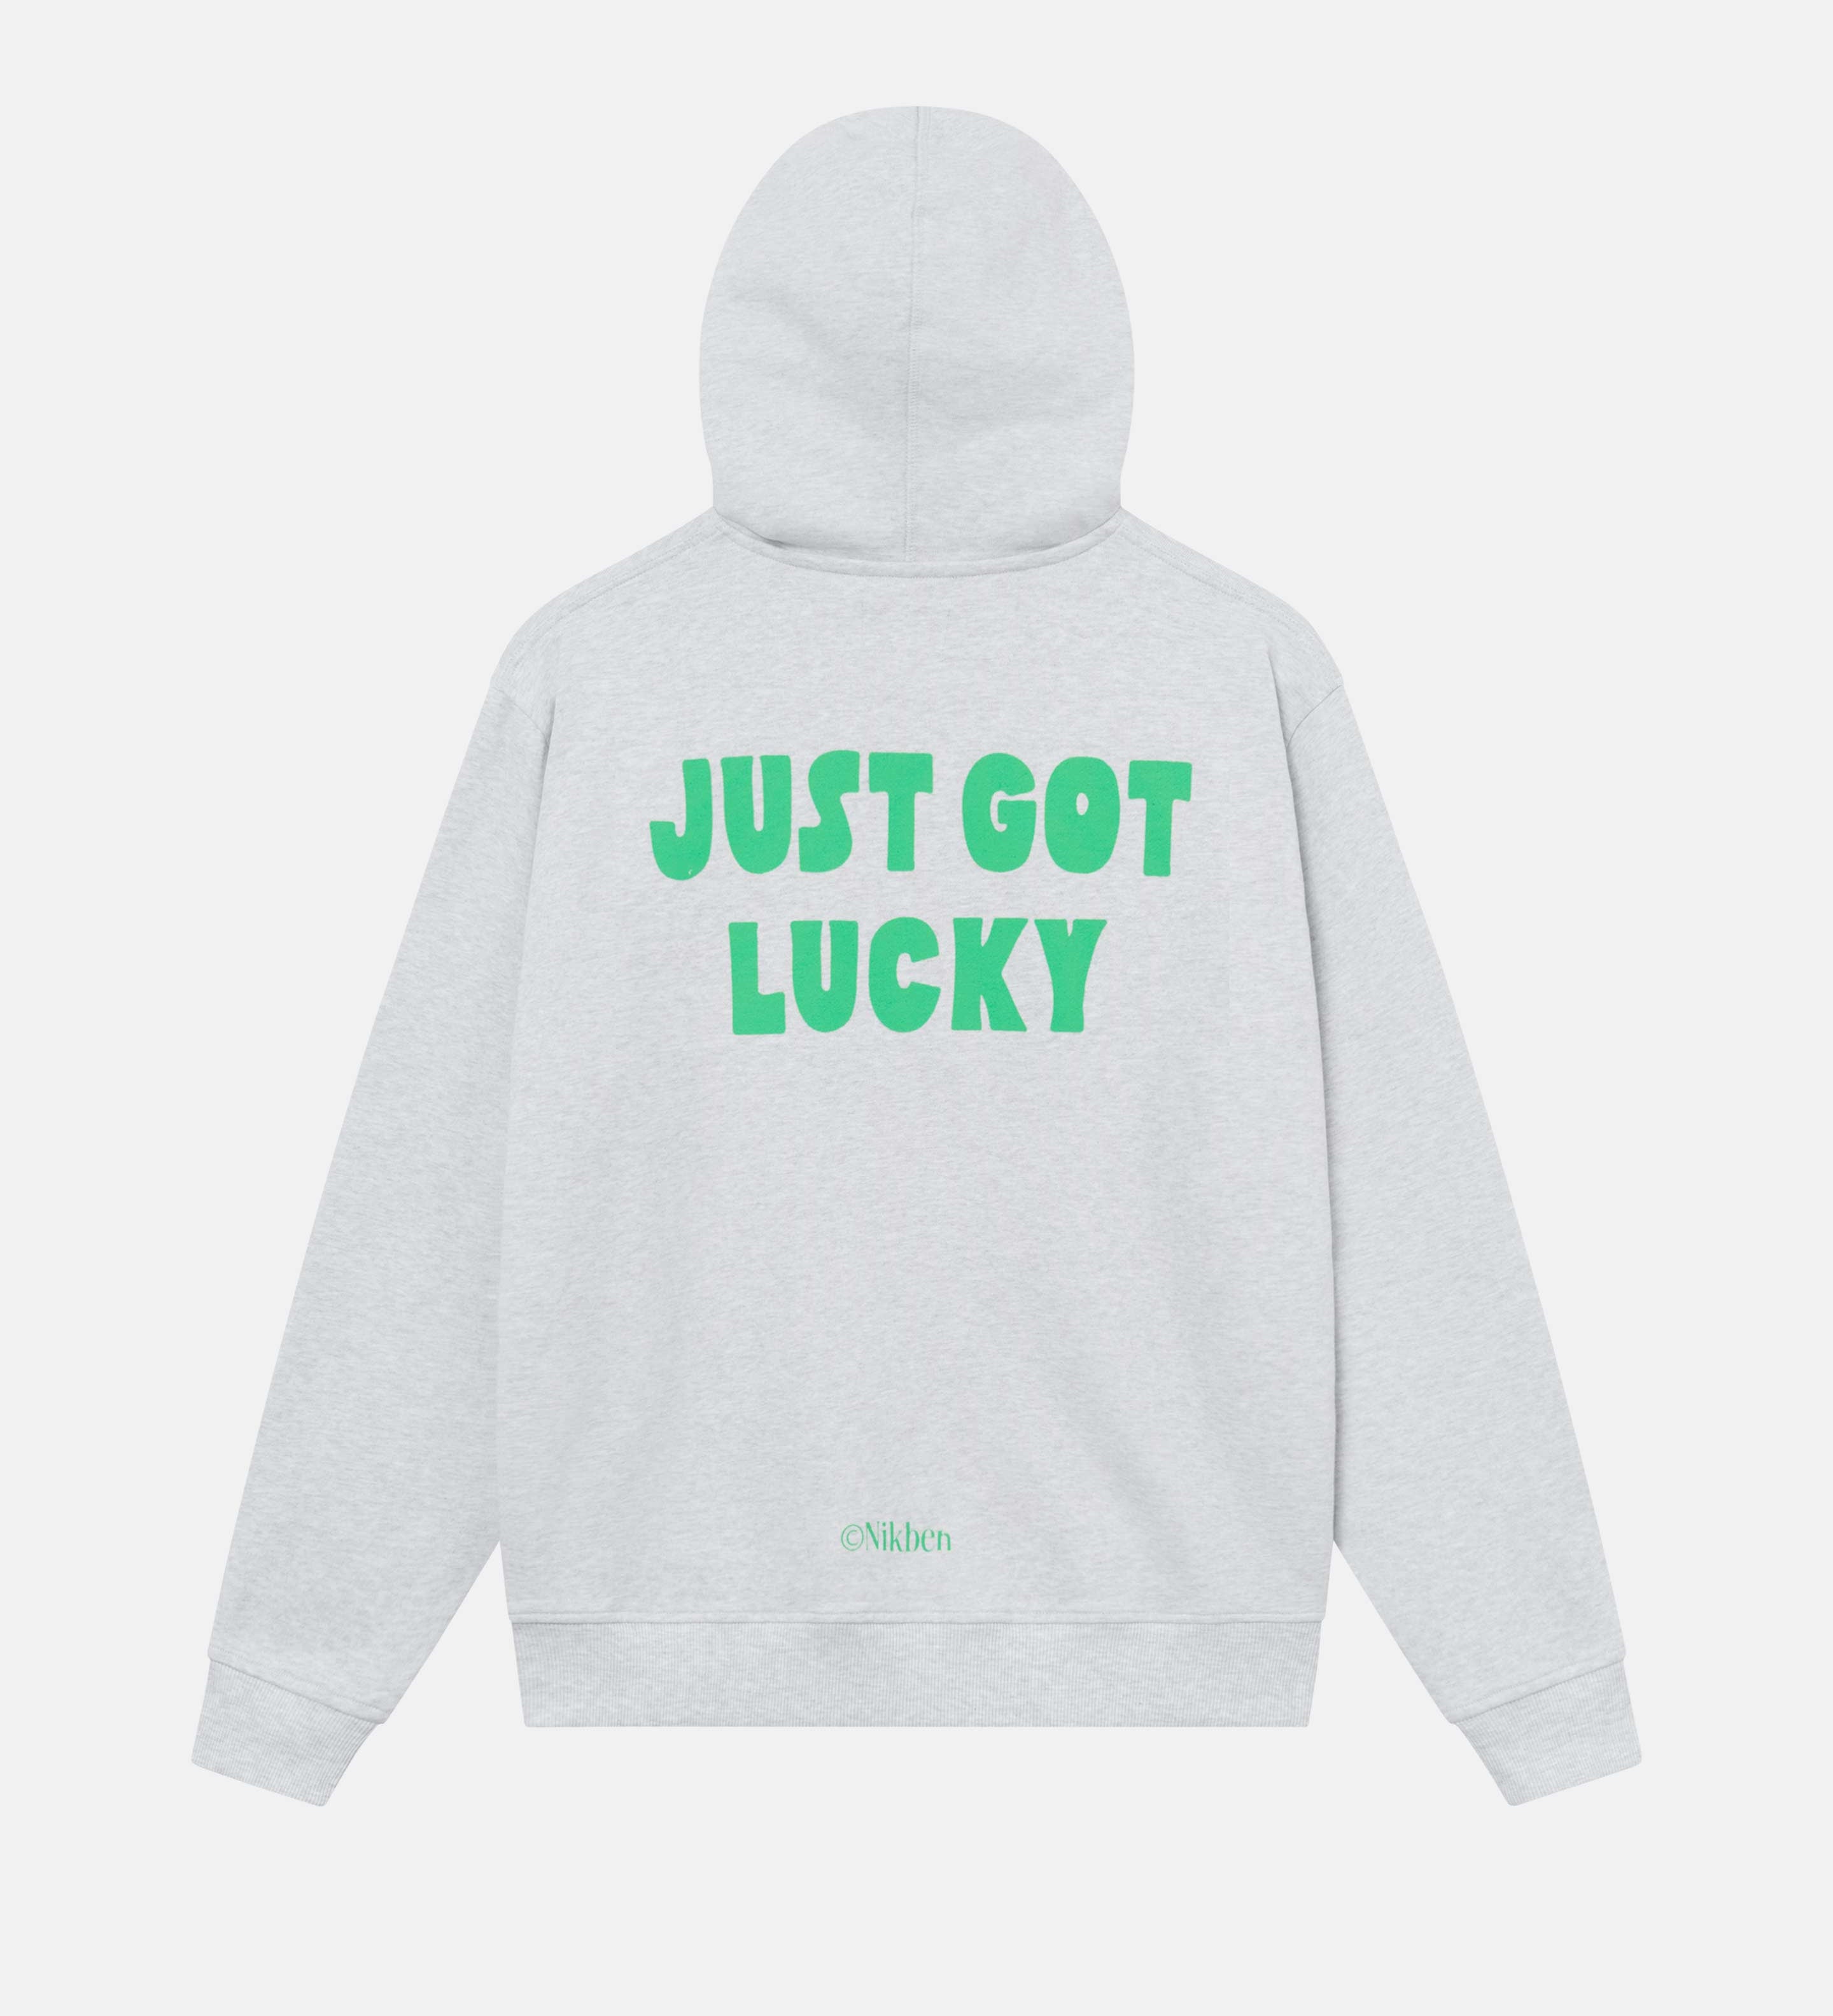 Grey hoodie with a large green "Just got lucky" text print on its back